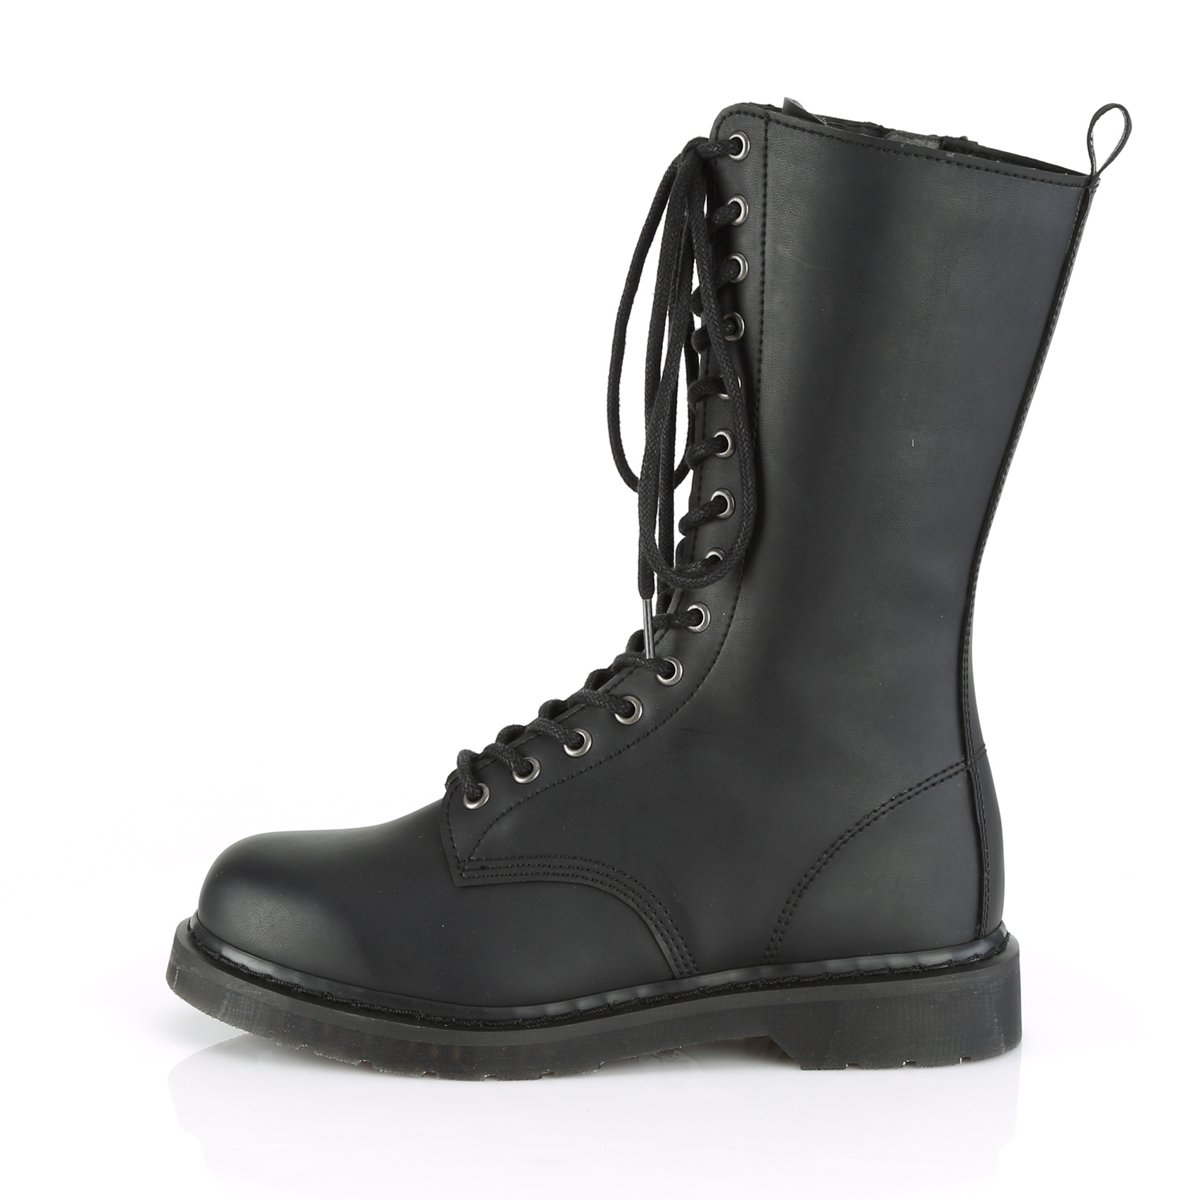 Demonia Bolt-300 Boots | Buy Sexy Shoes at Shoefreaks.ca